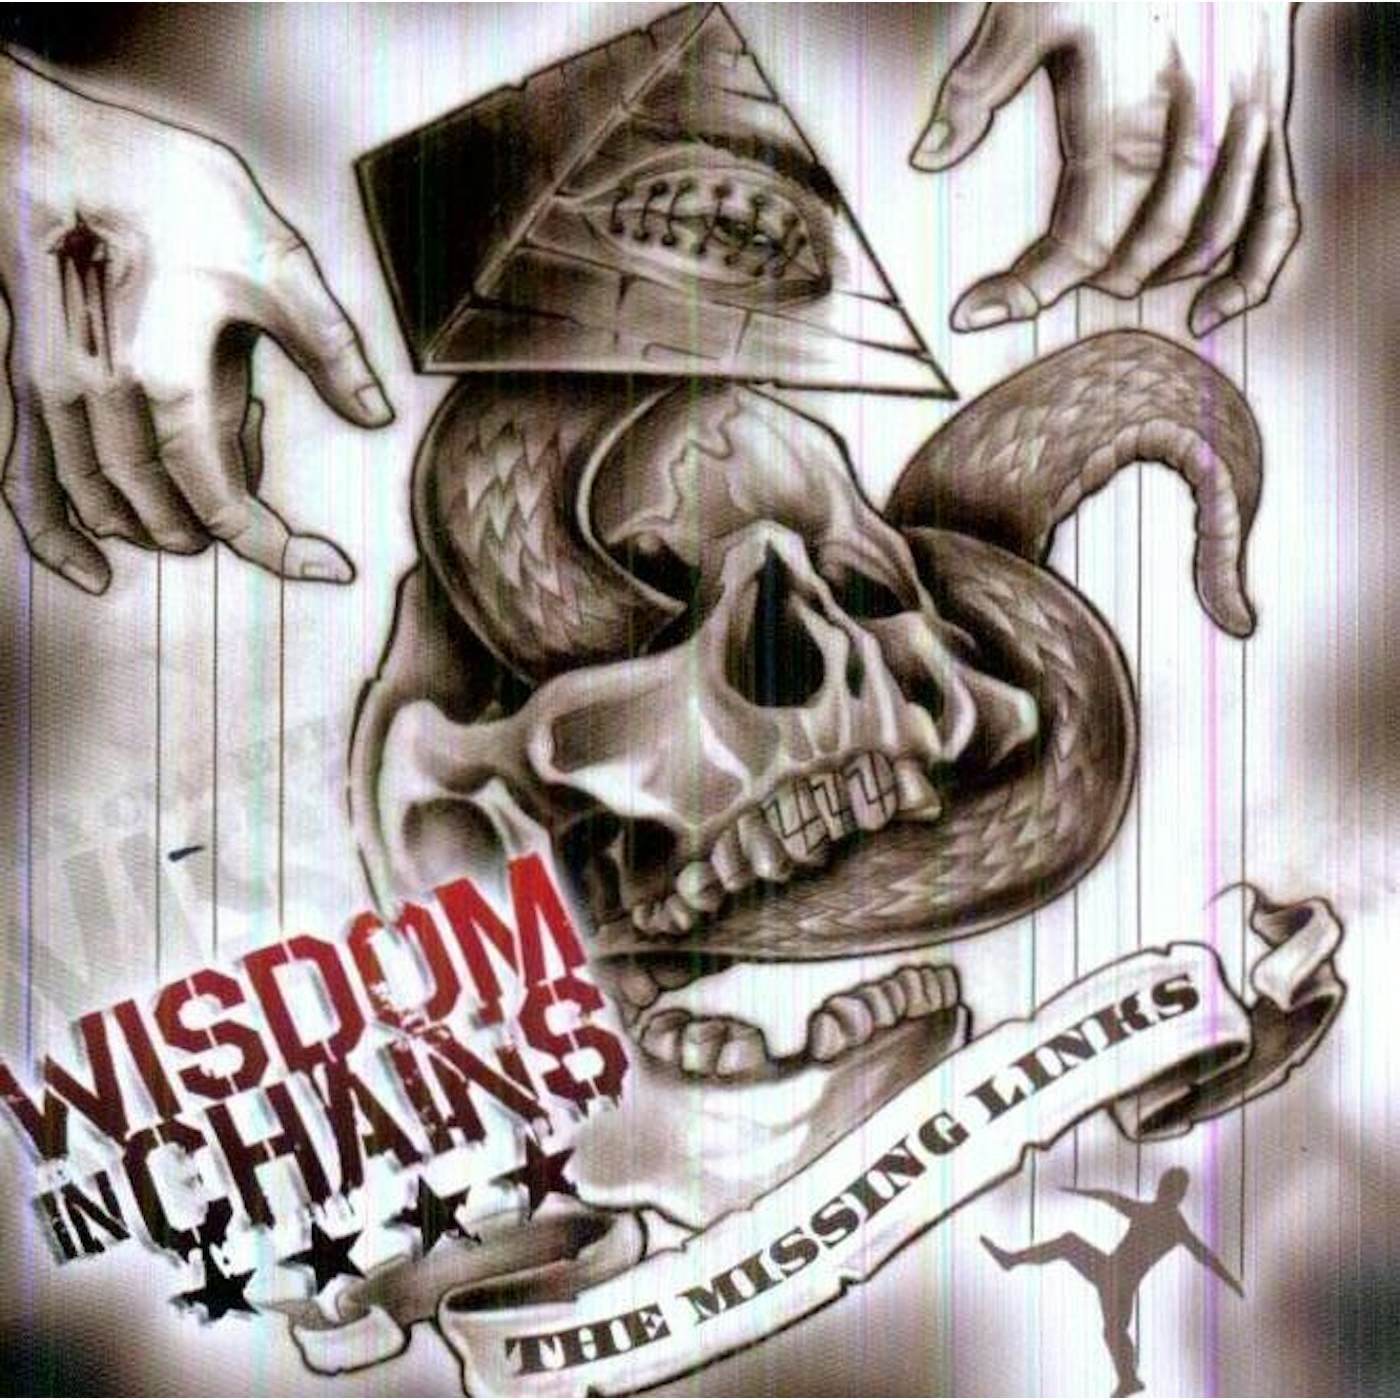 Wisdom In Chains MISSING LINKS CD